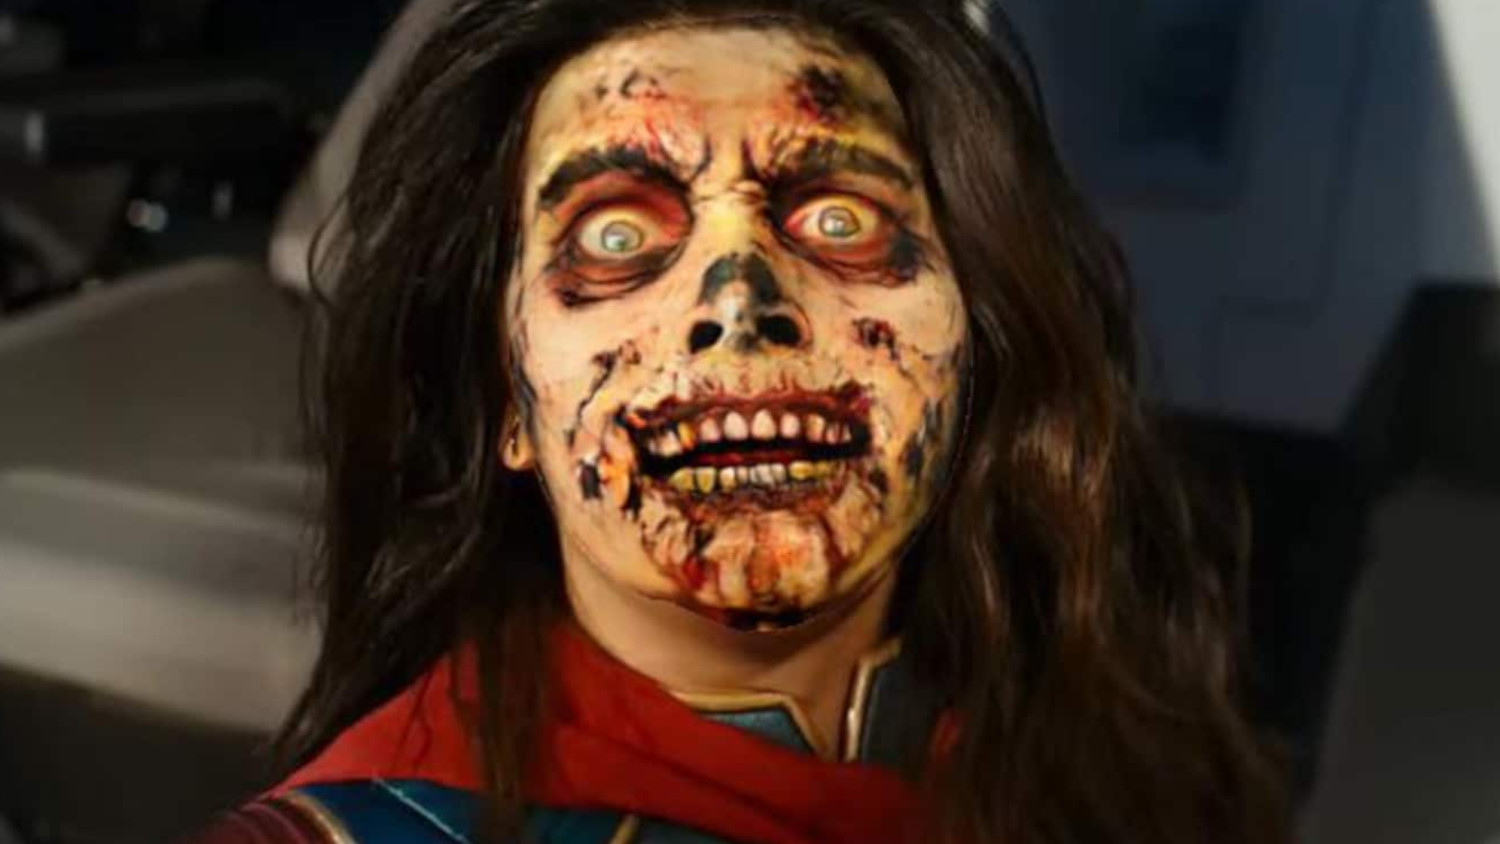 Marvel Zombies: Ms. Marvel Lead Of Show Not Blade